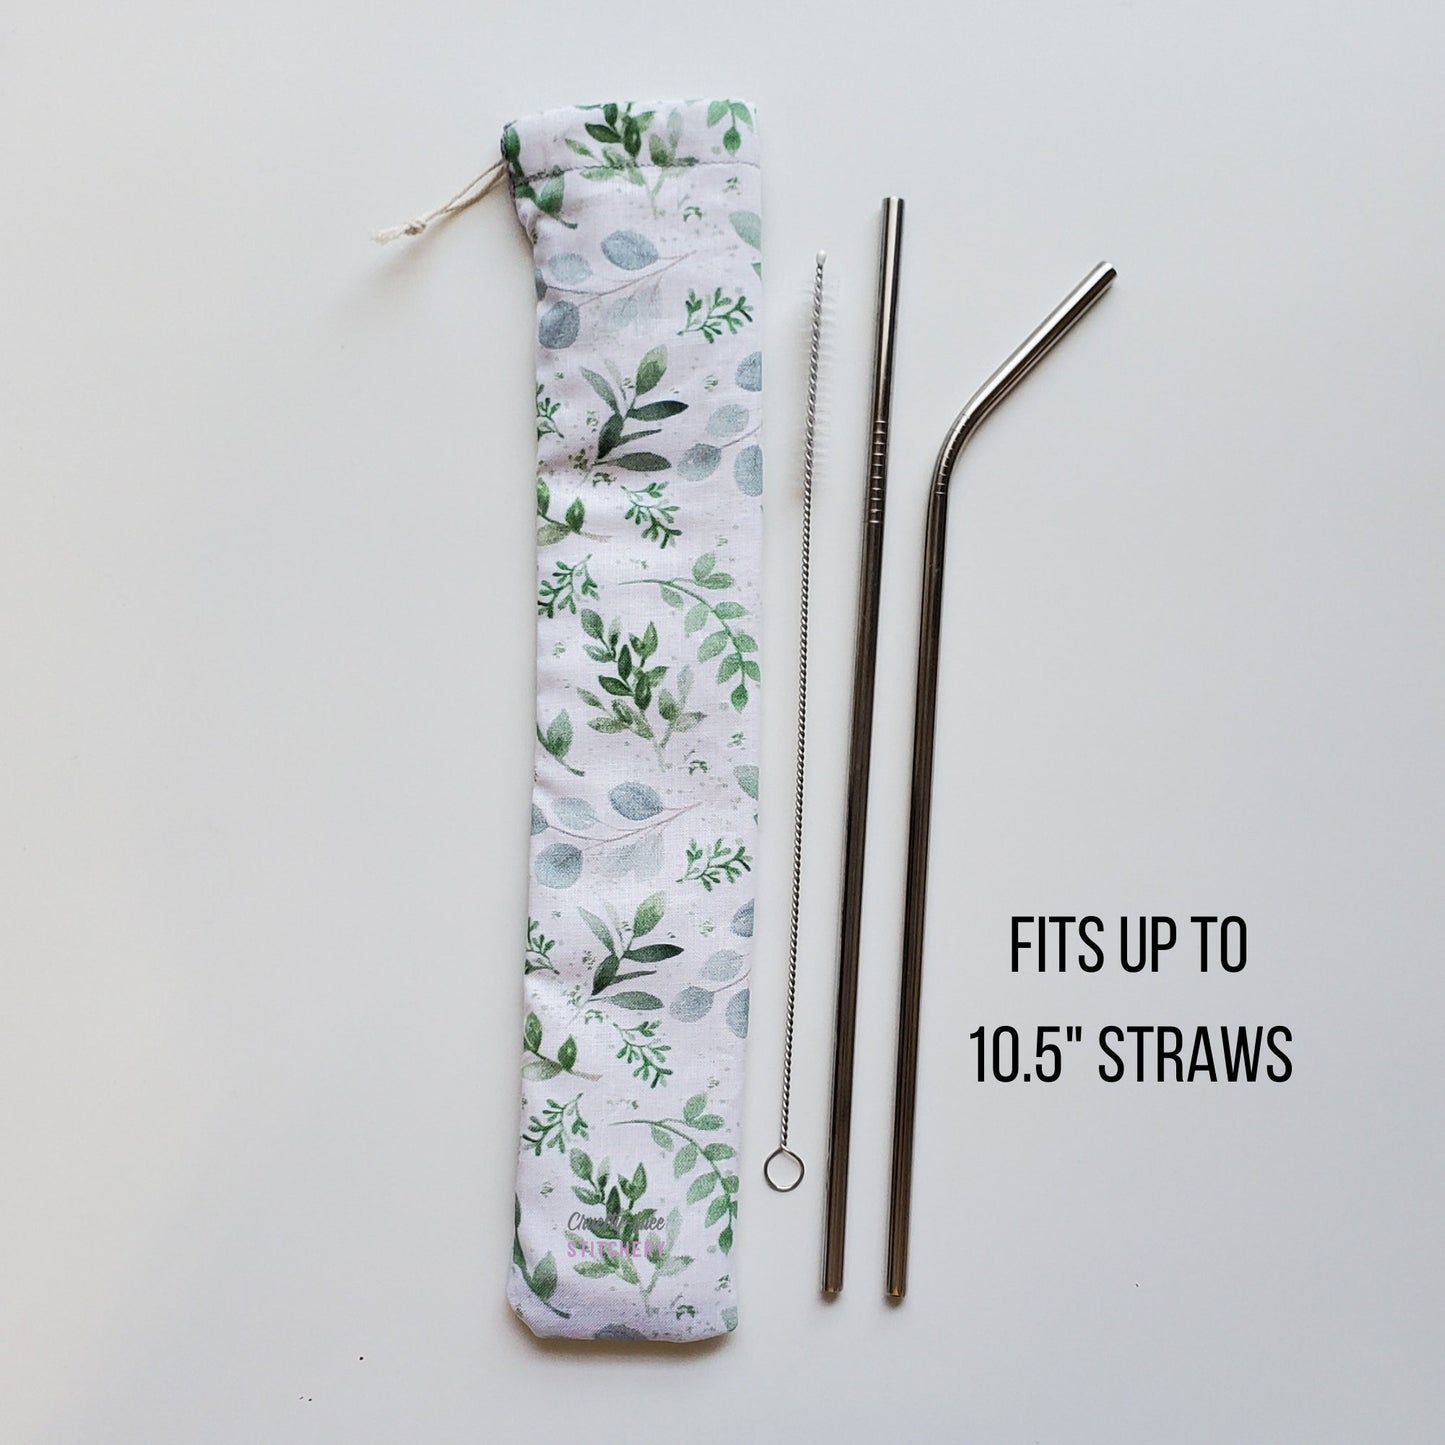 Reusable straw pouch in the same eucalyptus print laying vertically next to a straw cleaner brush, a straight stainless steel straw, and a bent stainless steel straw. Text reads &quot;fits up to 10.5 inch straws&quot;